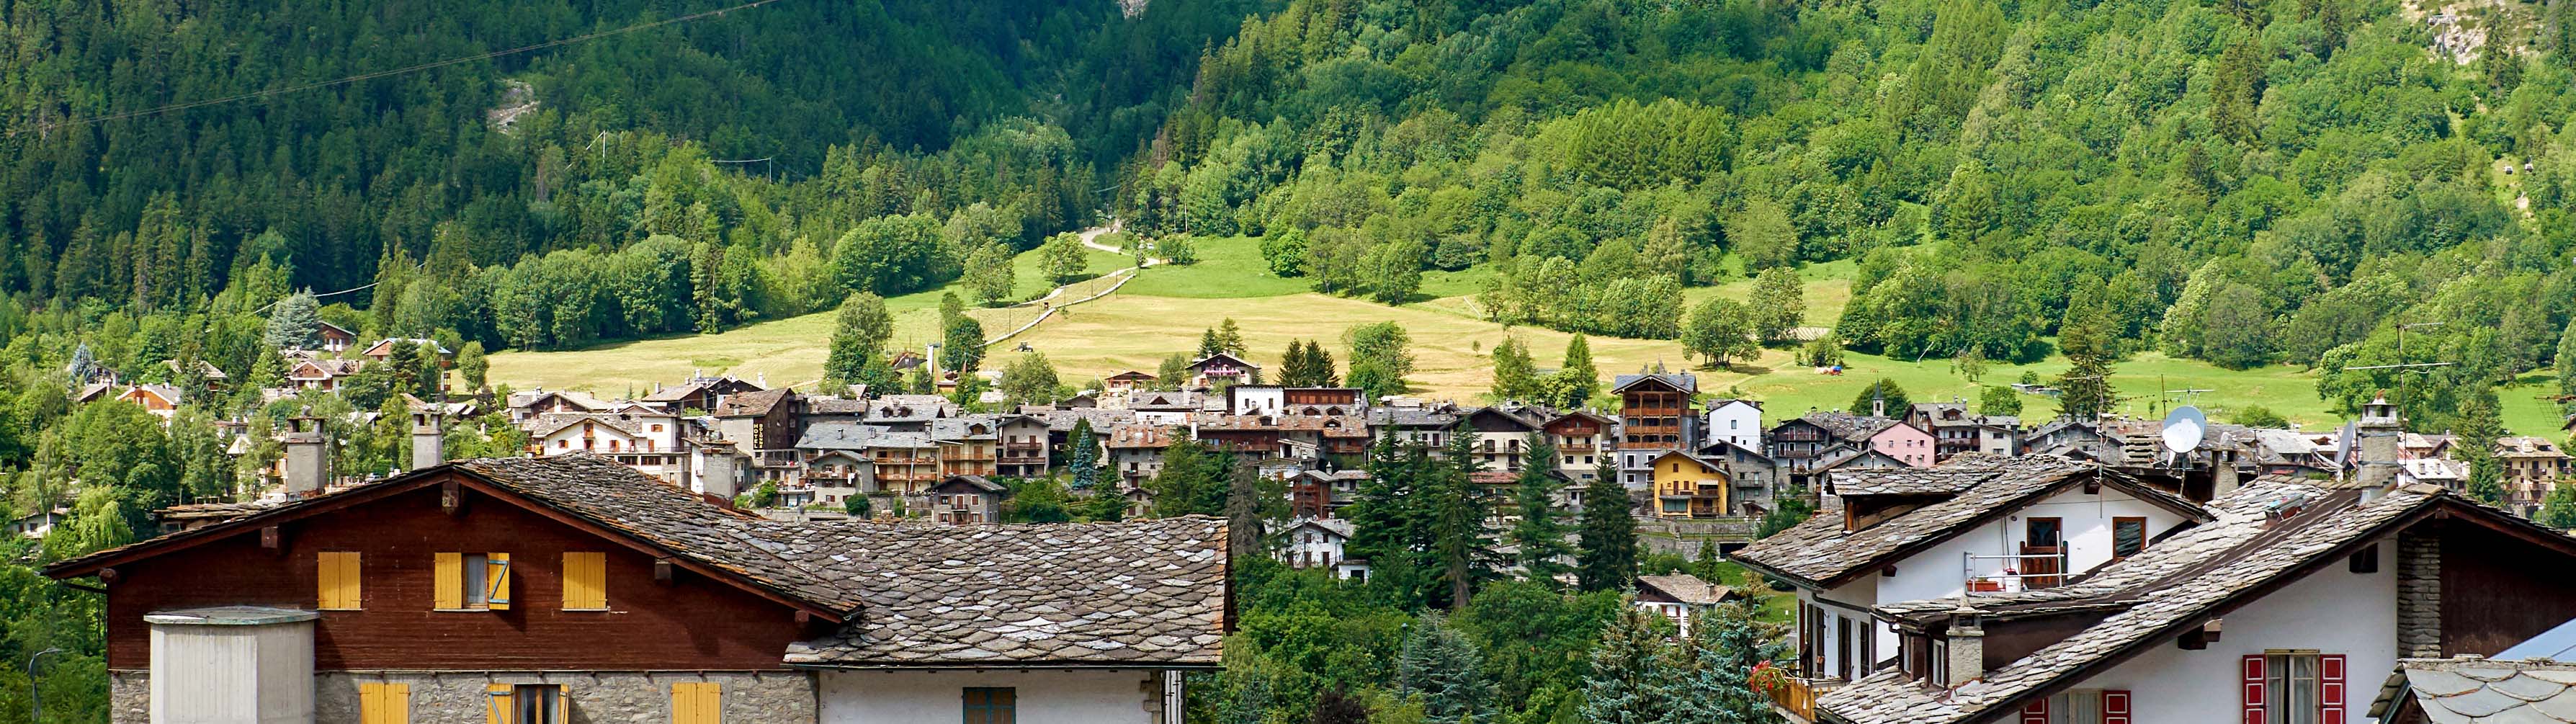 On a summer's day, the chalets and cabins of Chamonix lie before rolling green slopes.